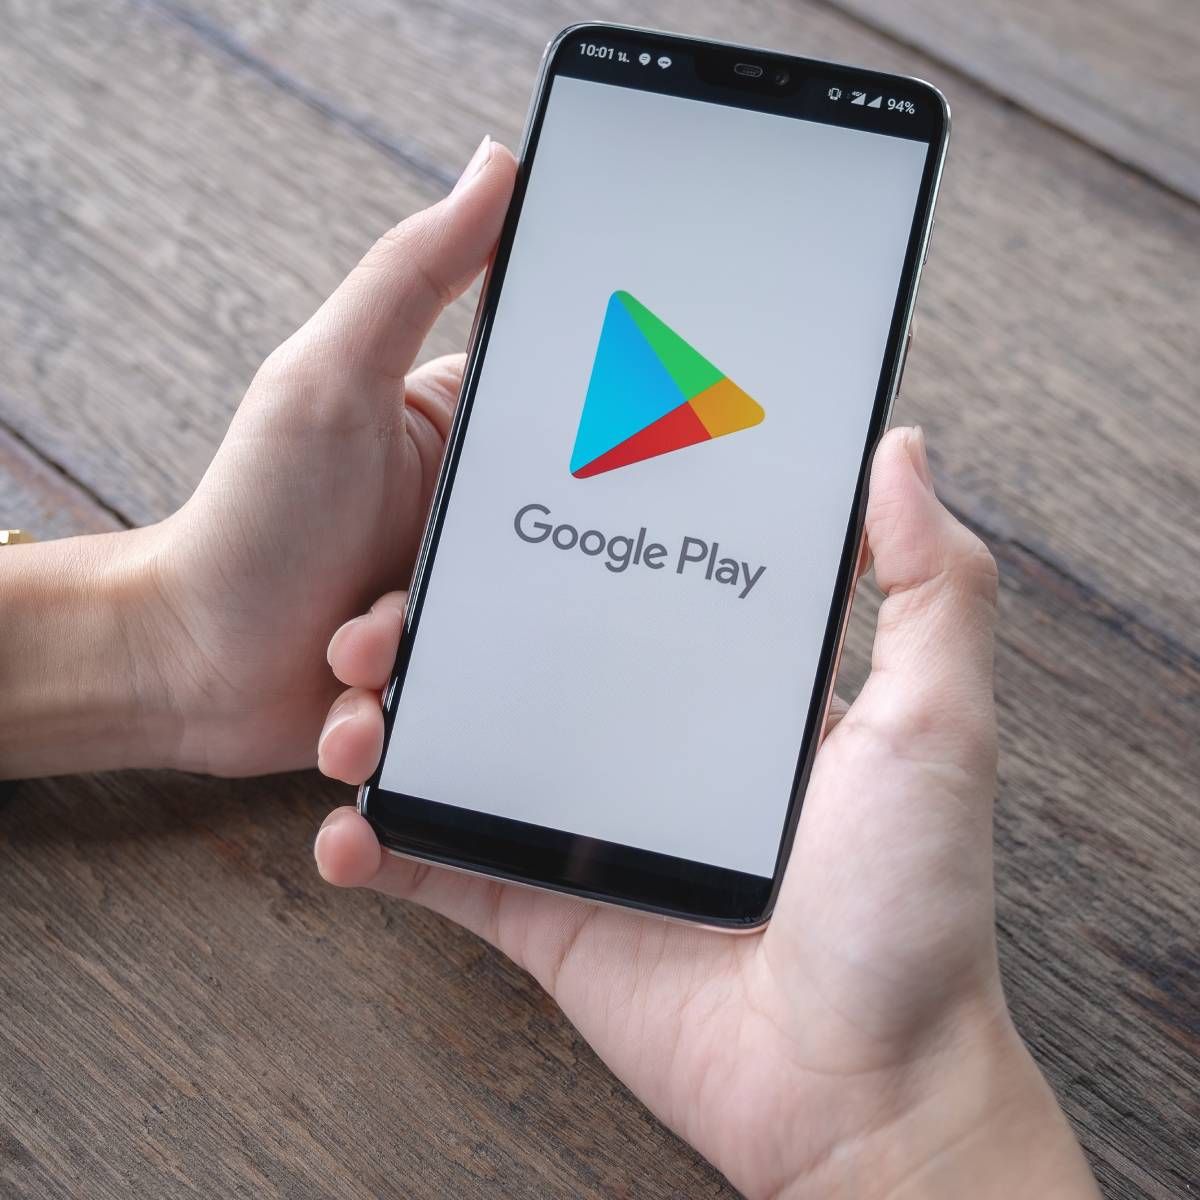 Someone is holding an Android device that is open on the Google Play Store screen.